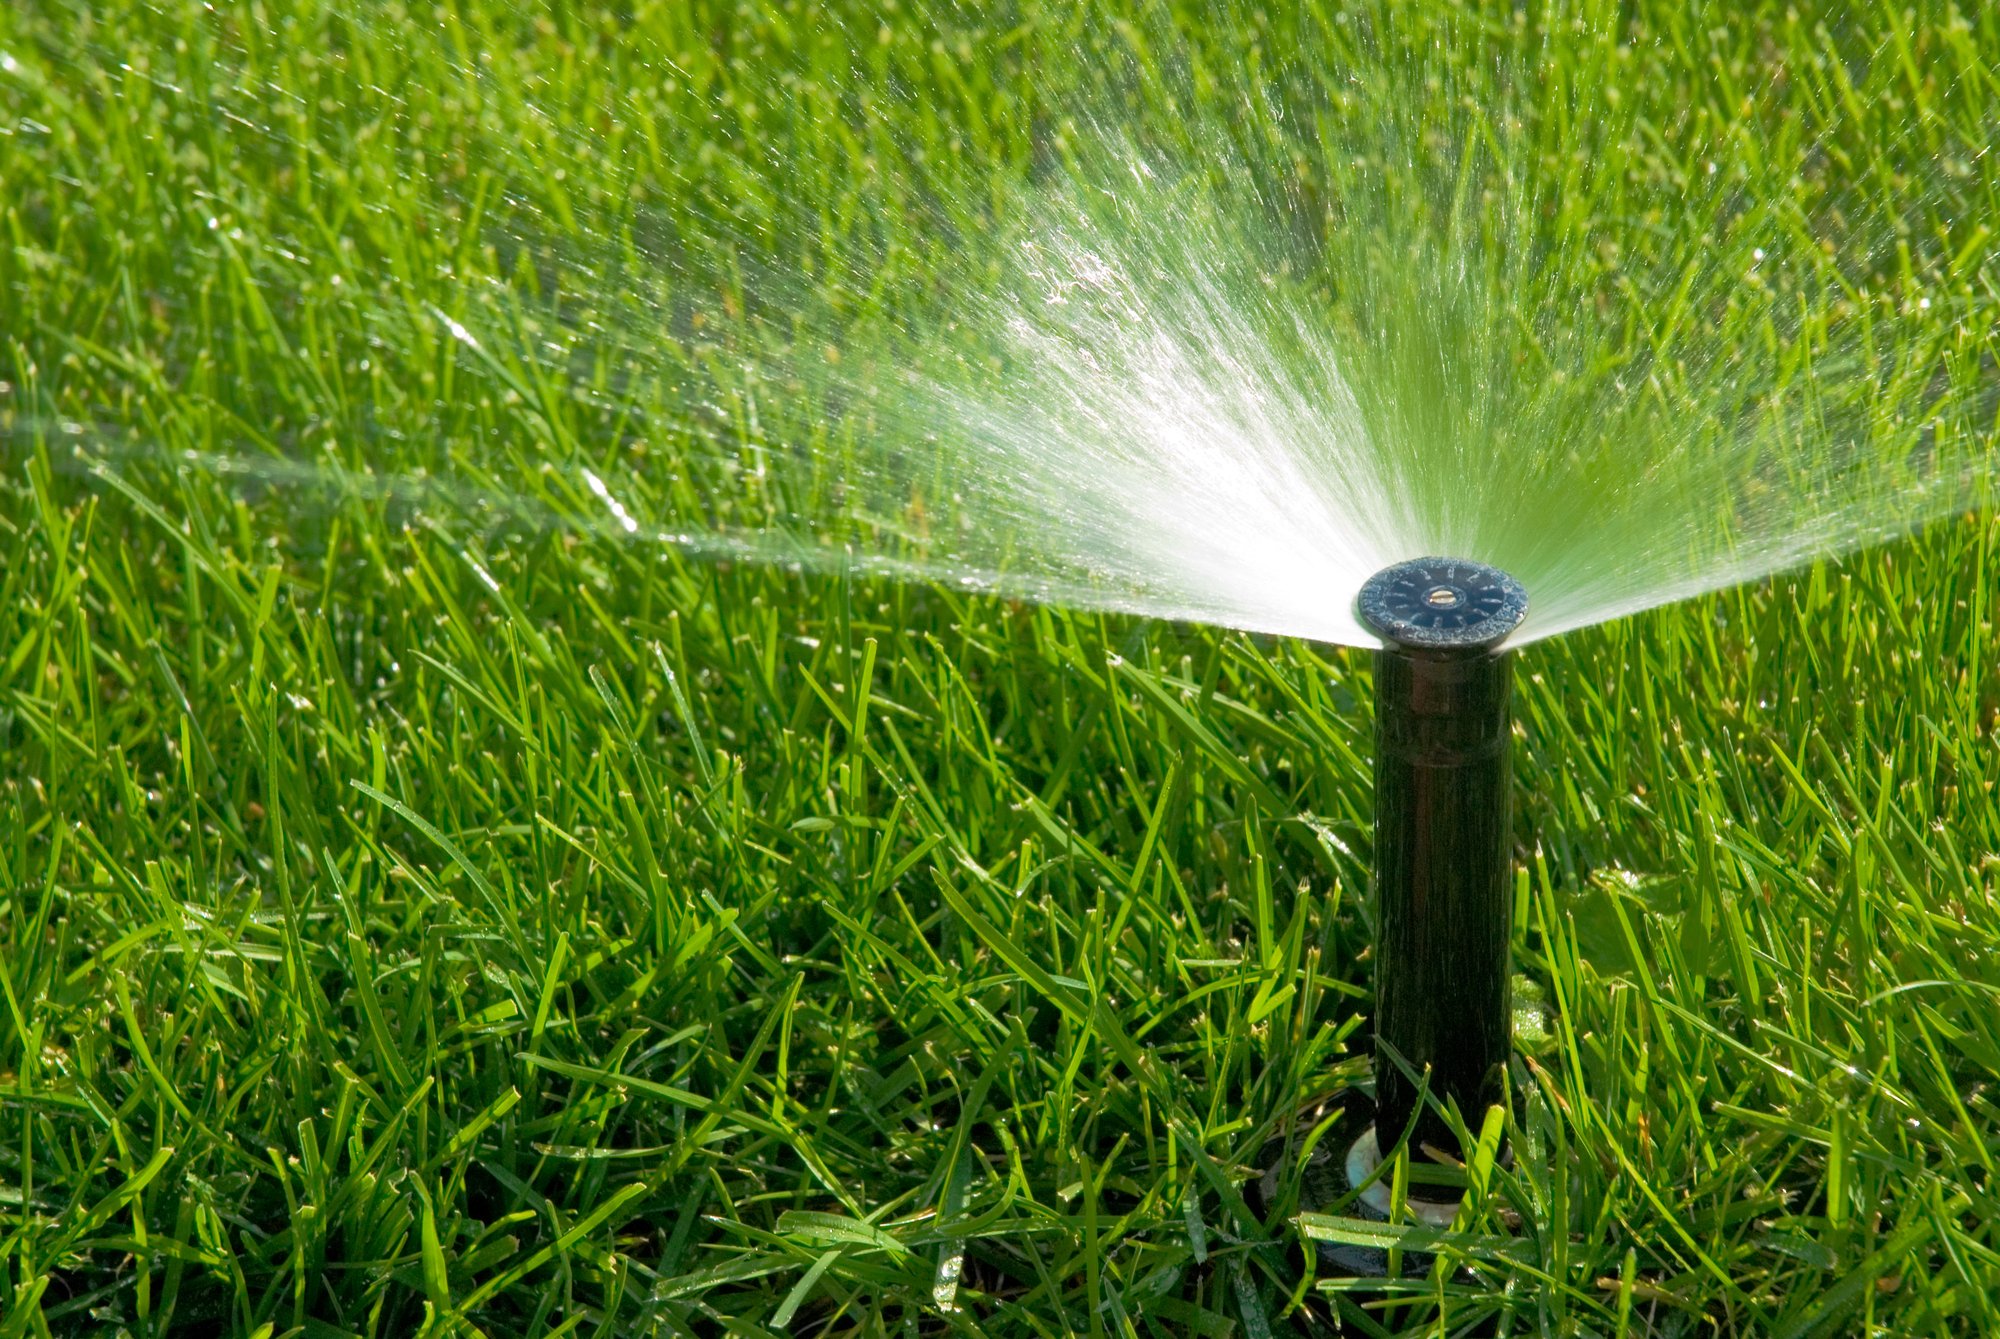 The Best Time To Water Grass